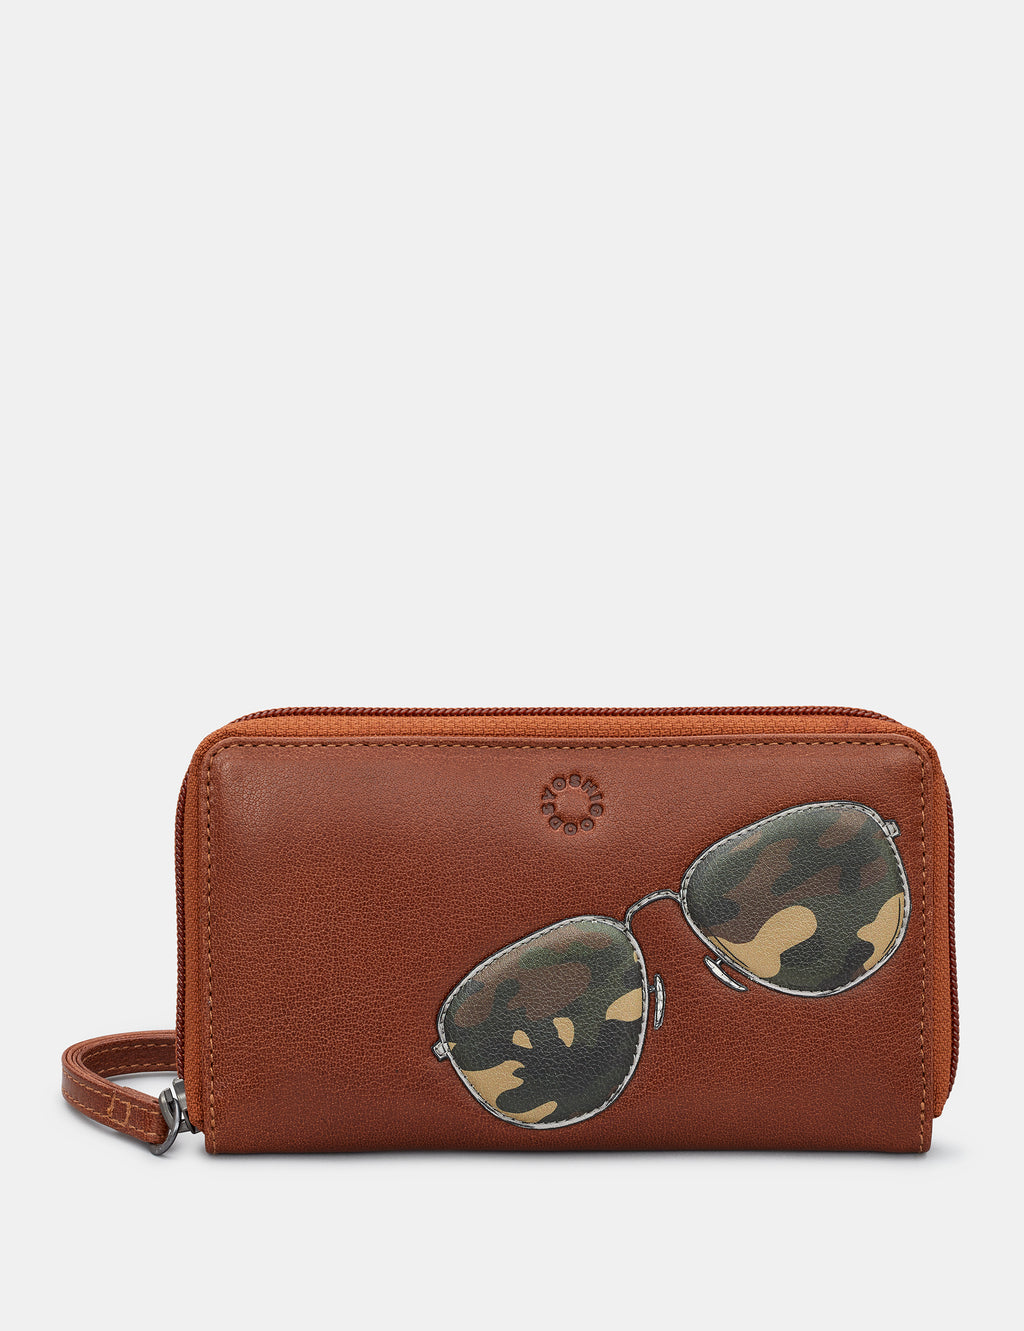 Aviators Zip Round Leather Purse With Strap